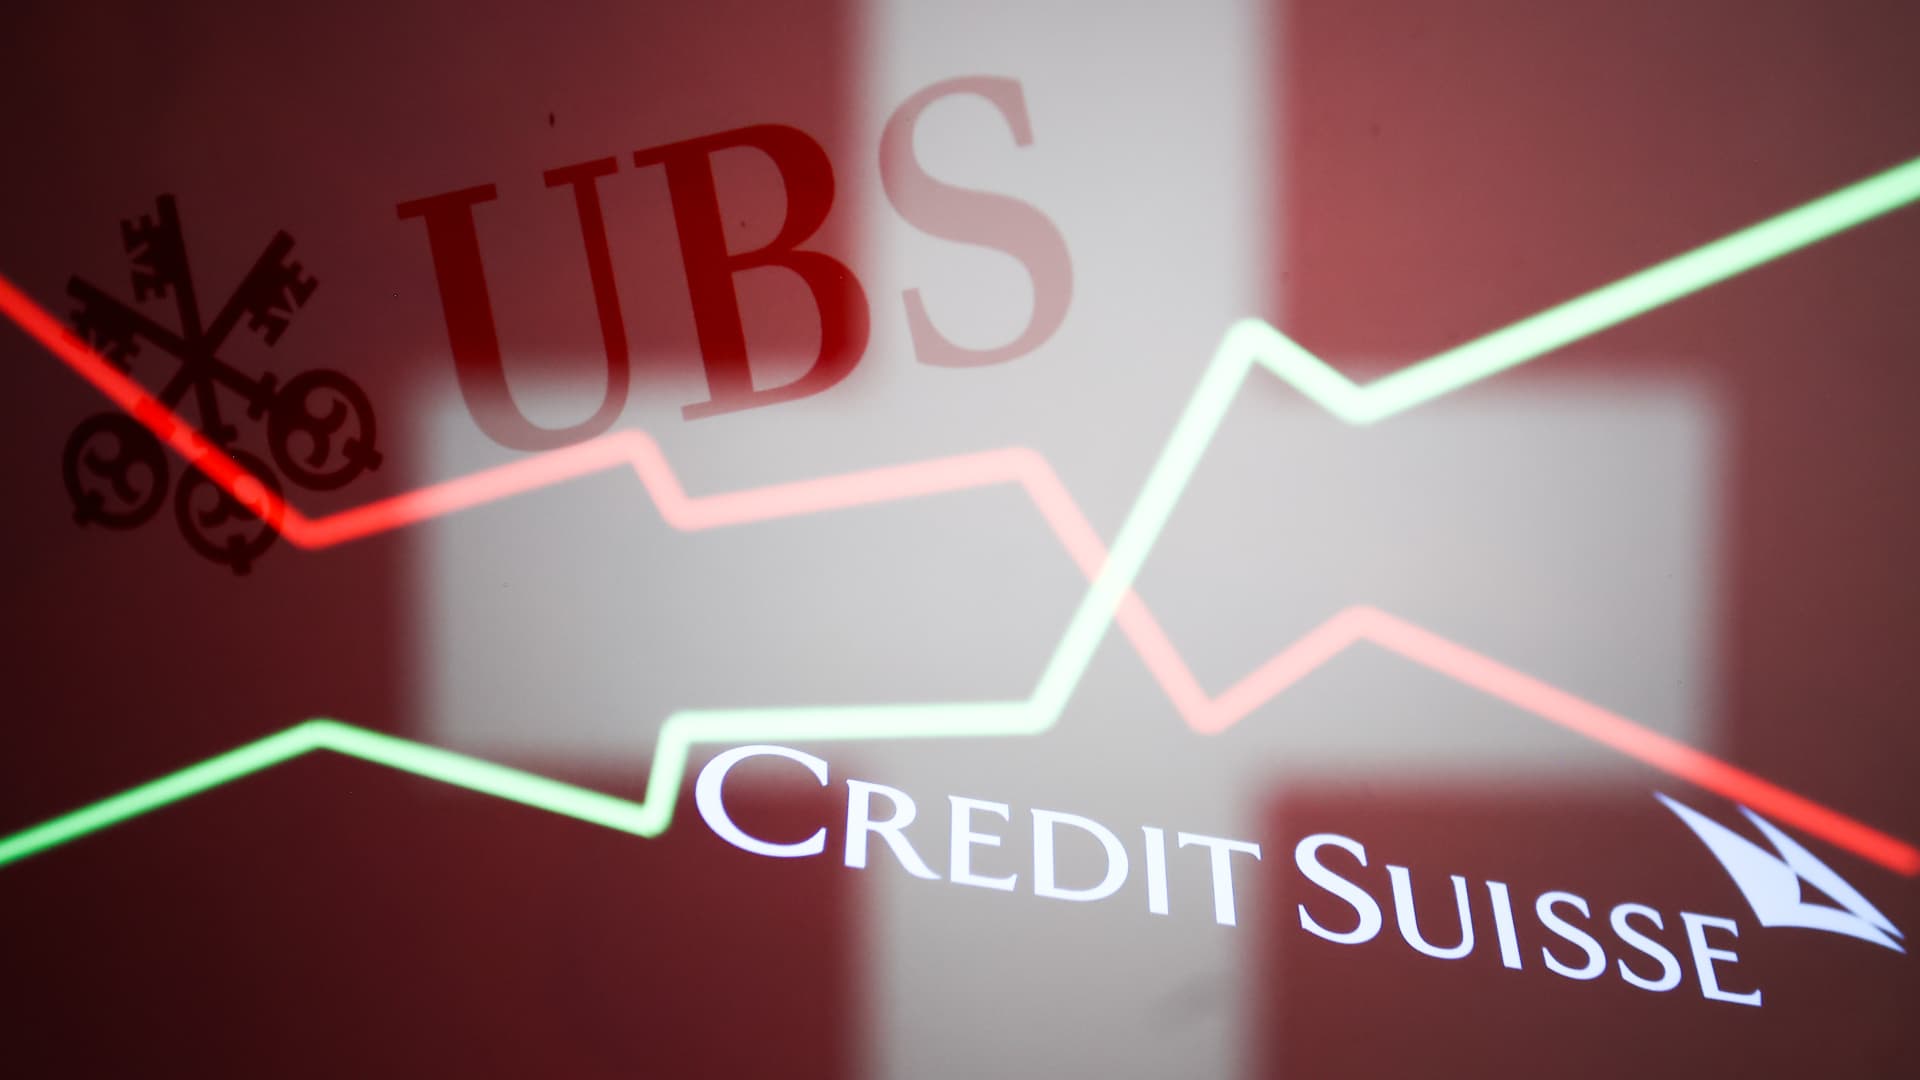 Asia’s regulators say banking system is robust and stable after UBS-Credit Suisse takeover deal